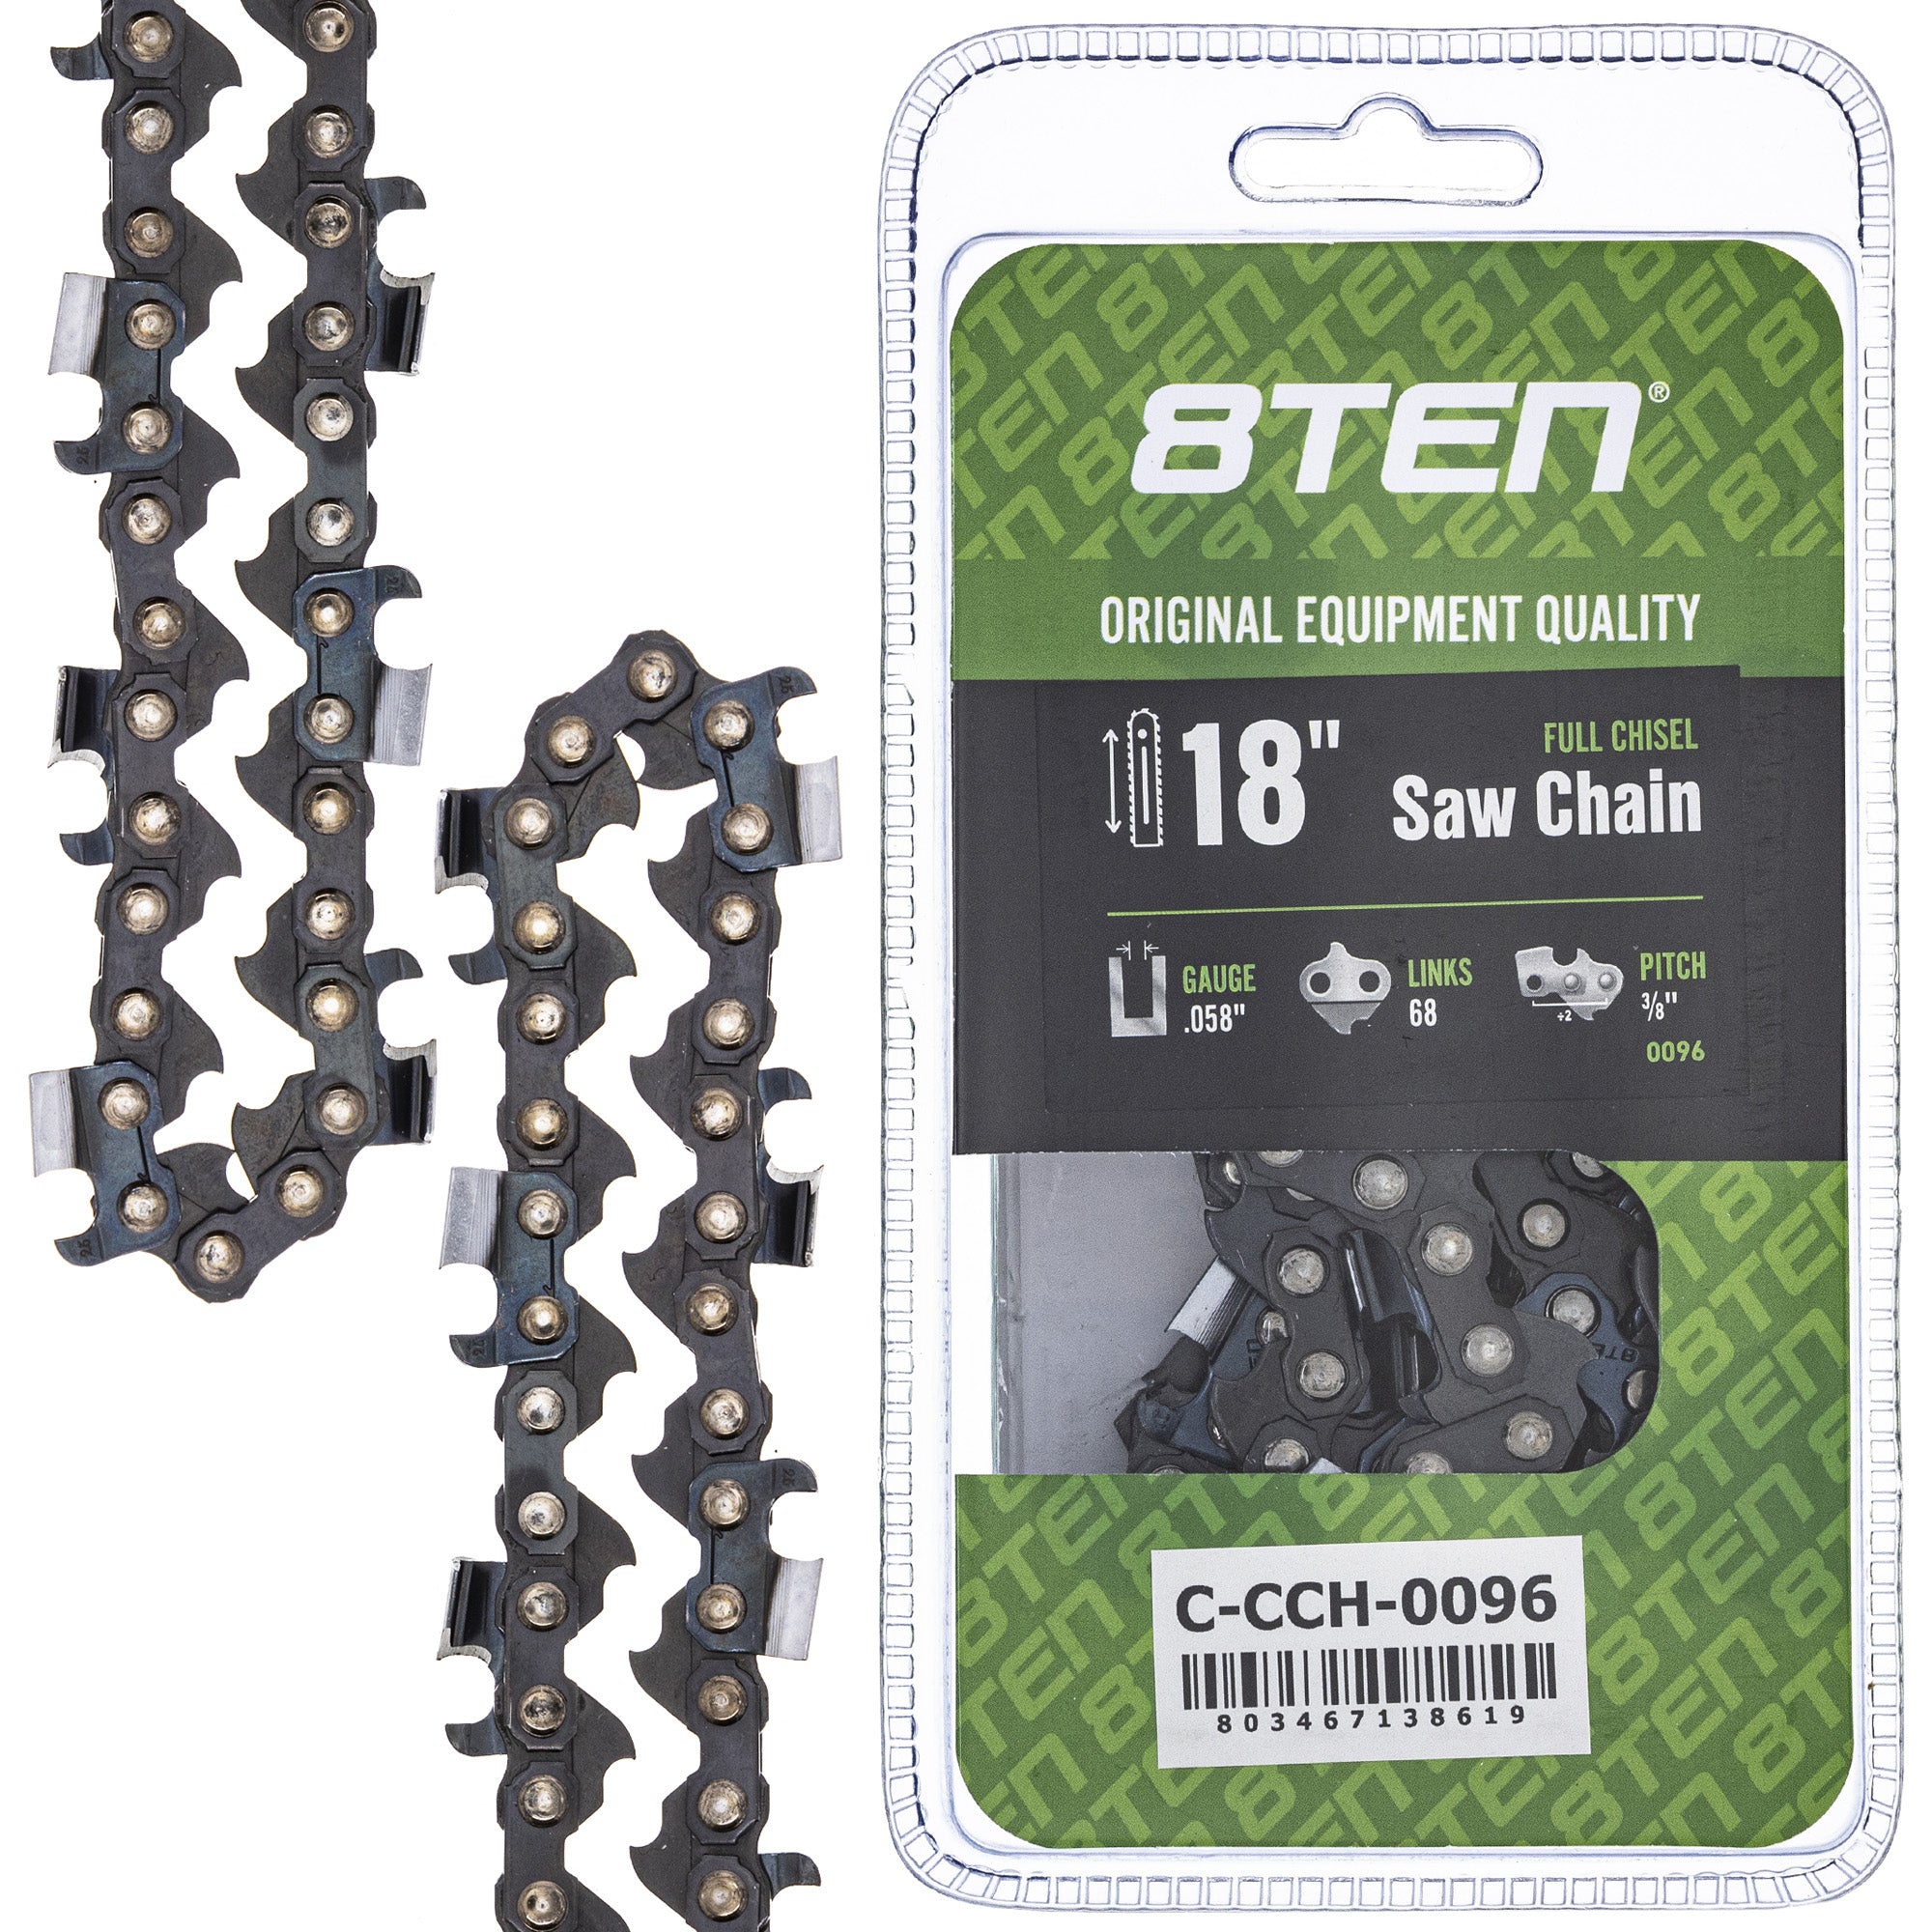 8TEN MK1010426 Guide Bar & Chain for S-65 S-55 S-50 R-440